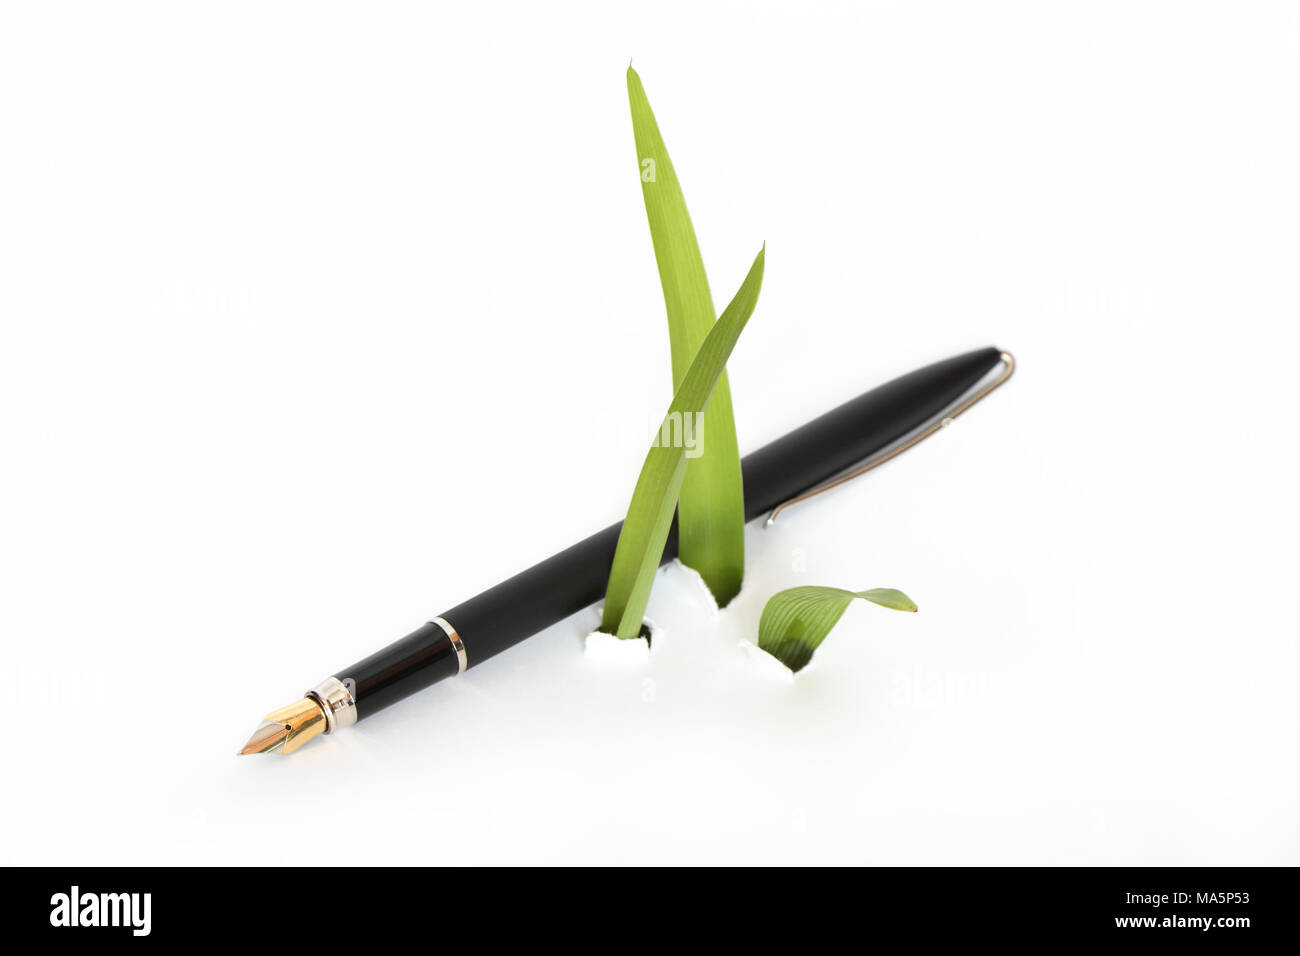 Fountain pen lying near green leaves growing out of white background Stock Photo